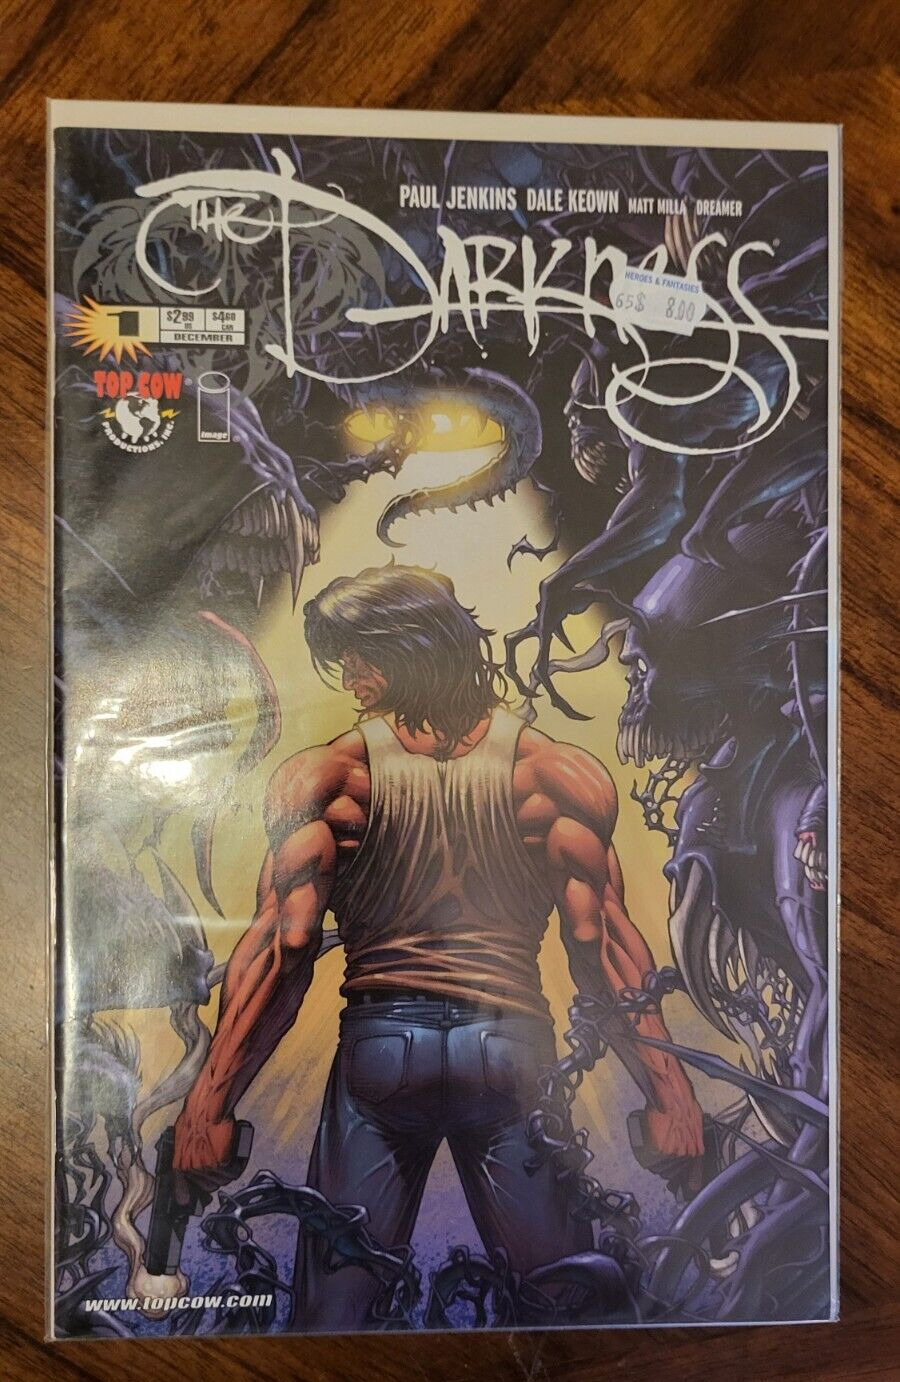 The Darkness #1 (2002-2005) Top Cow Comics